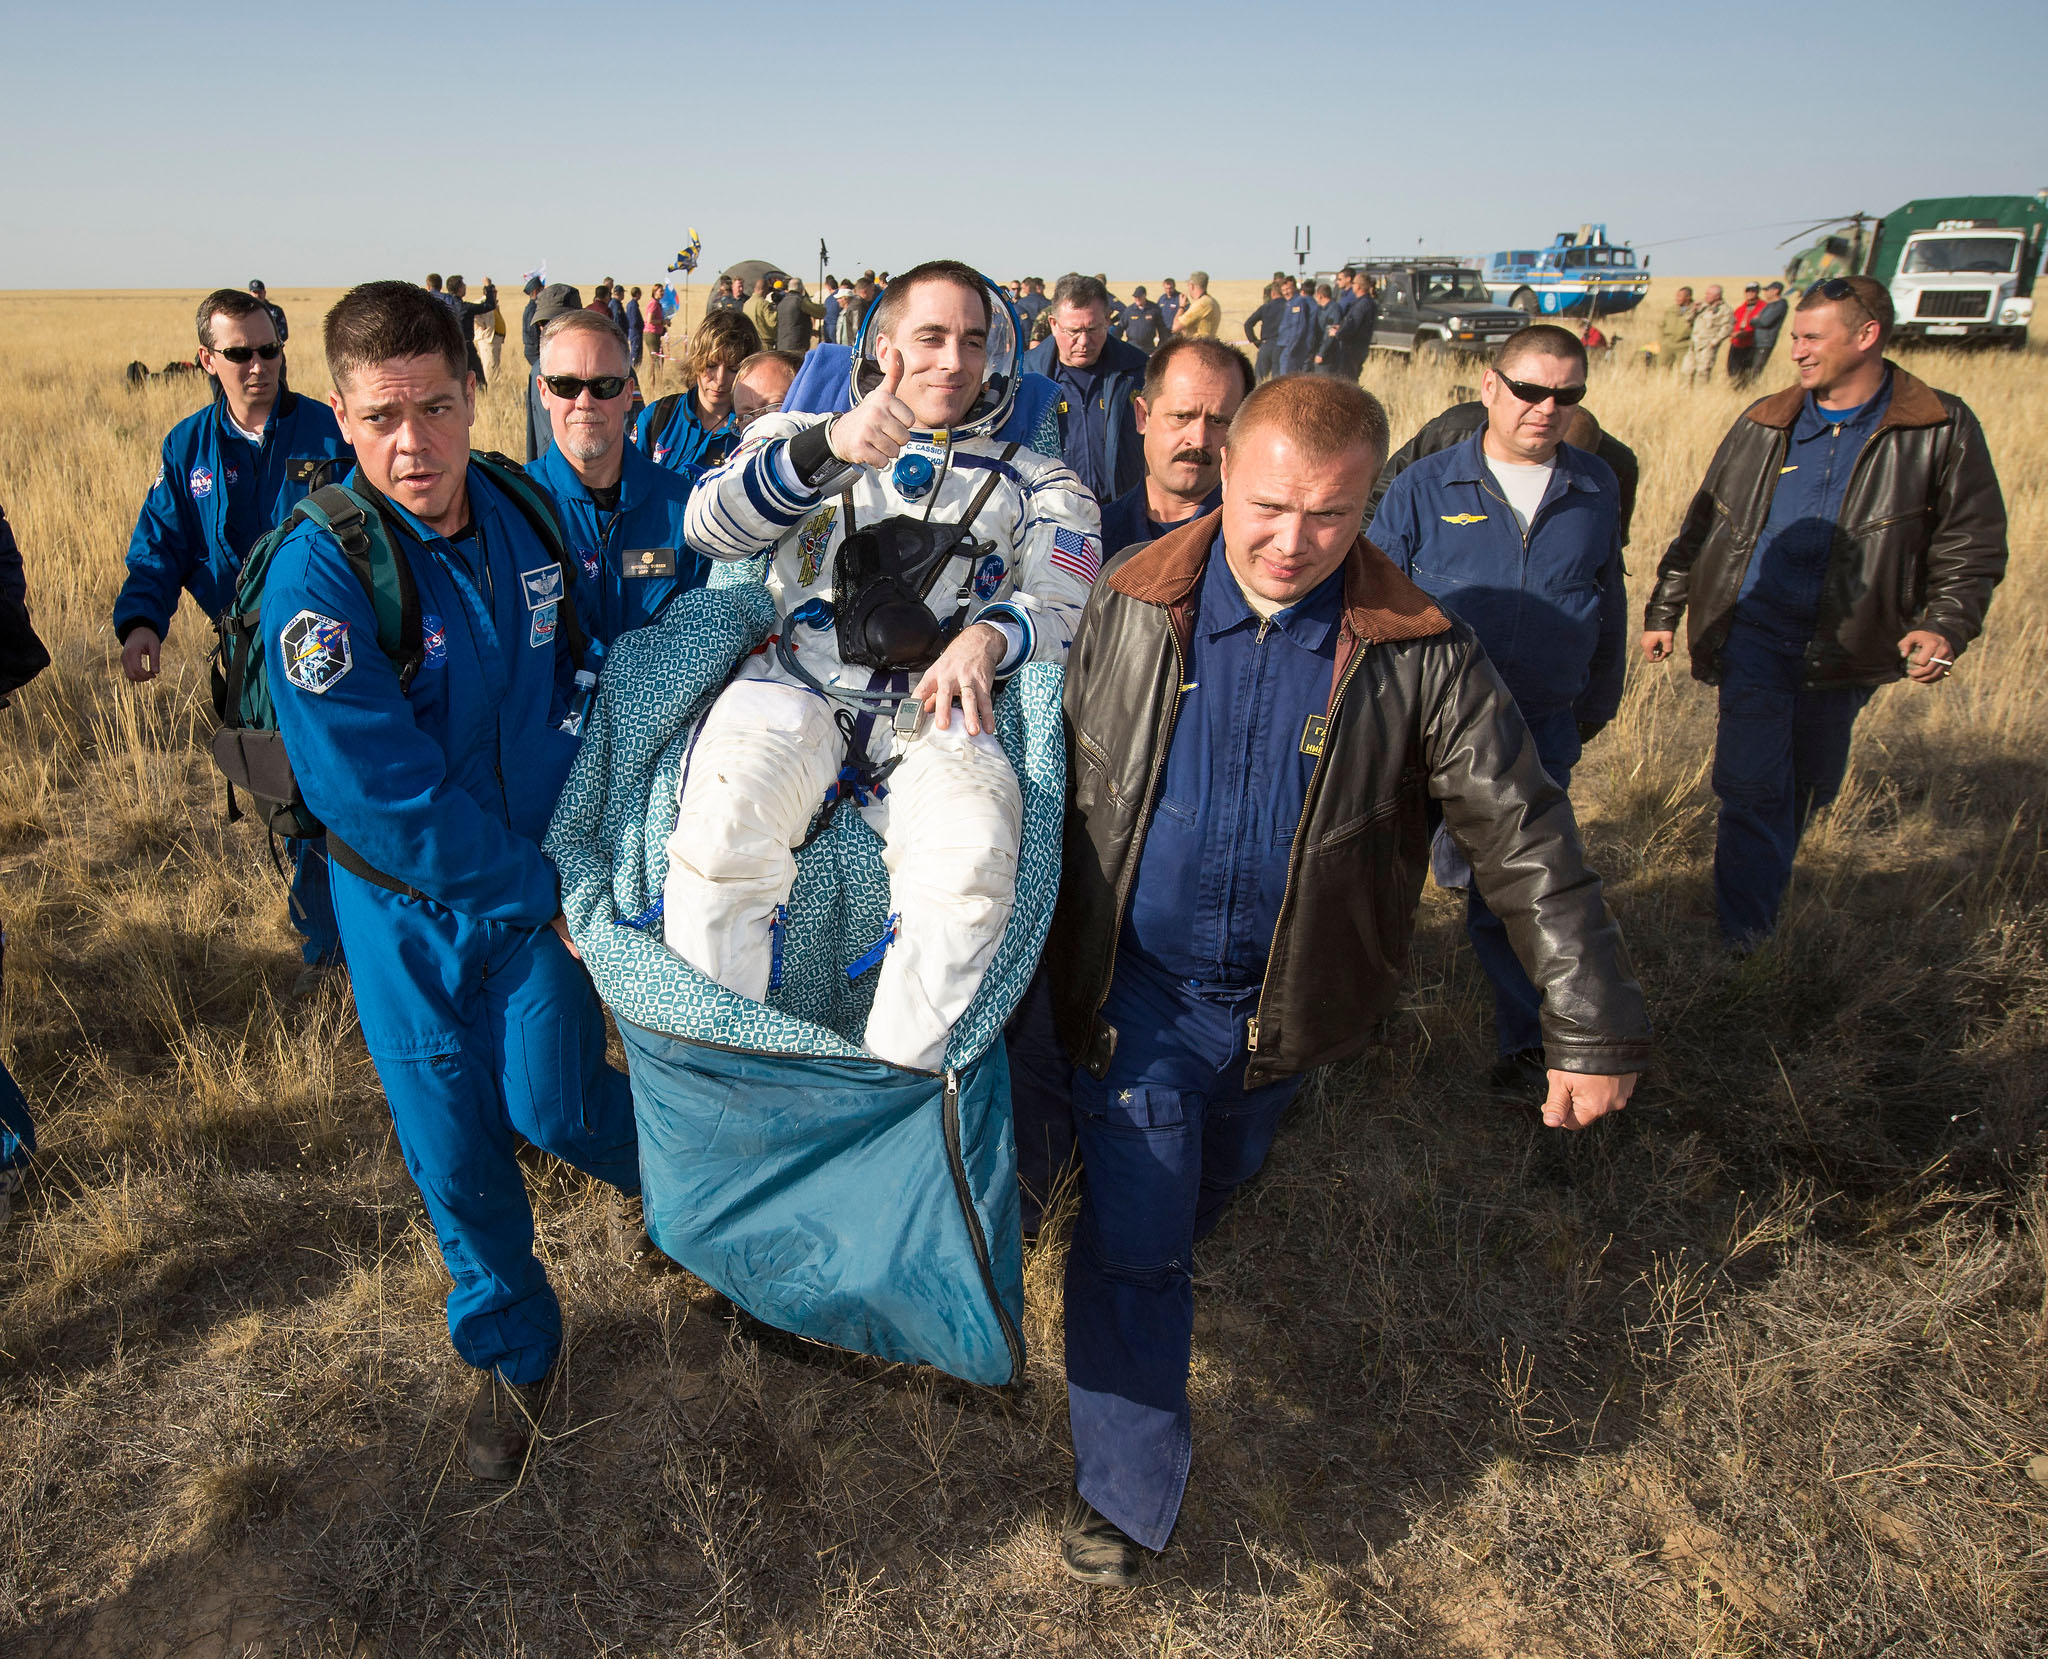 Chris Cassidy of NASA is carried to the medical tent